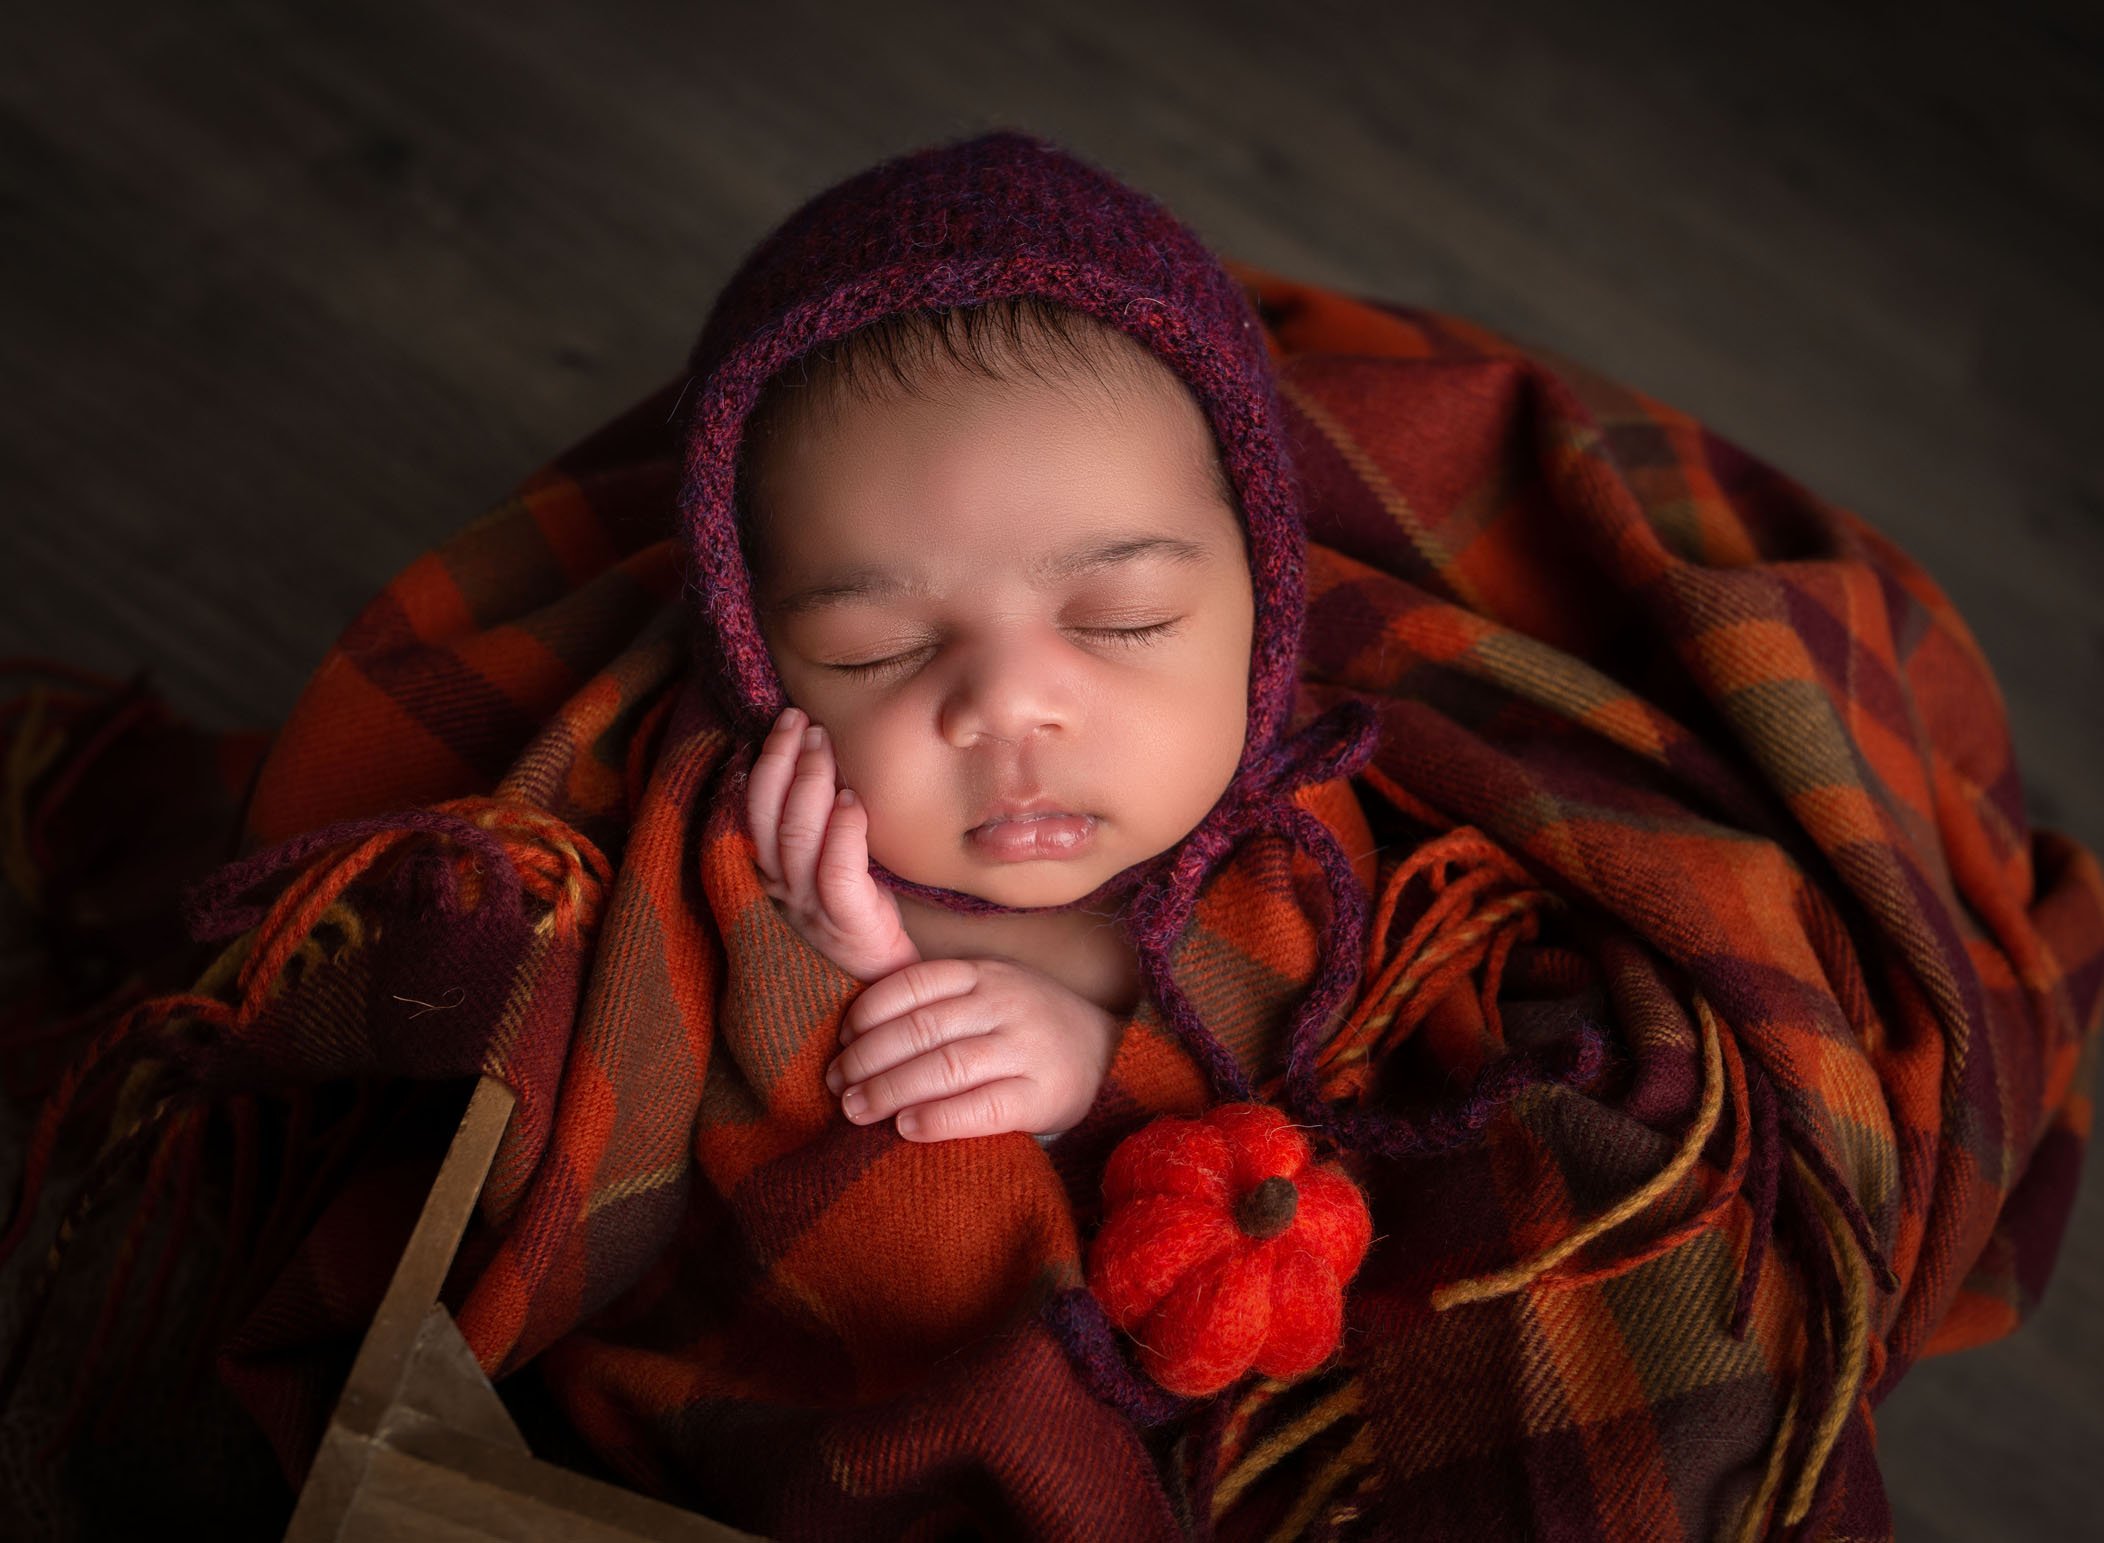 newborn wrapped in fall colors blanket sleeping with bonnet and baby pumpkin